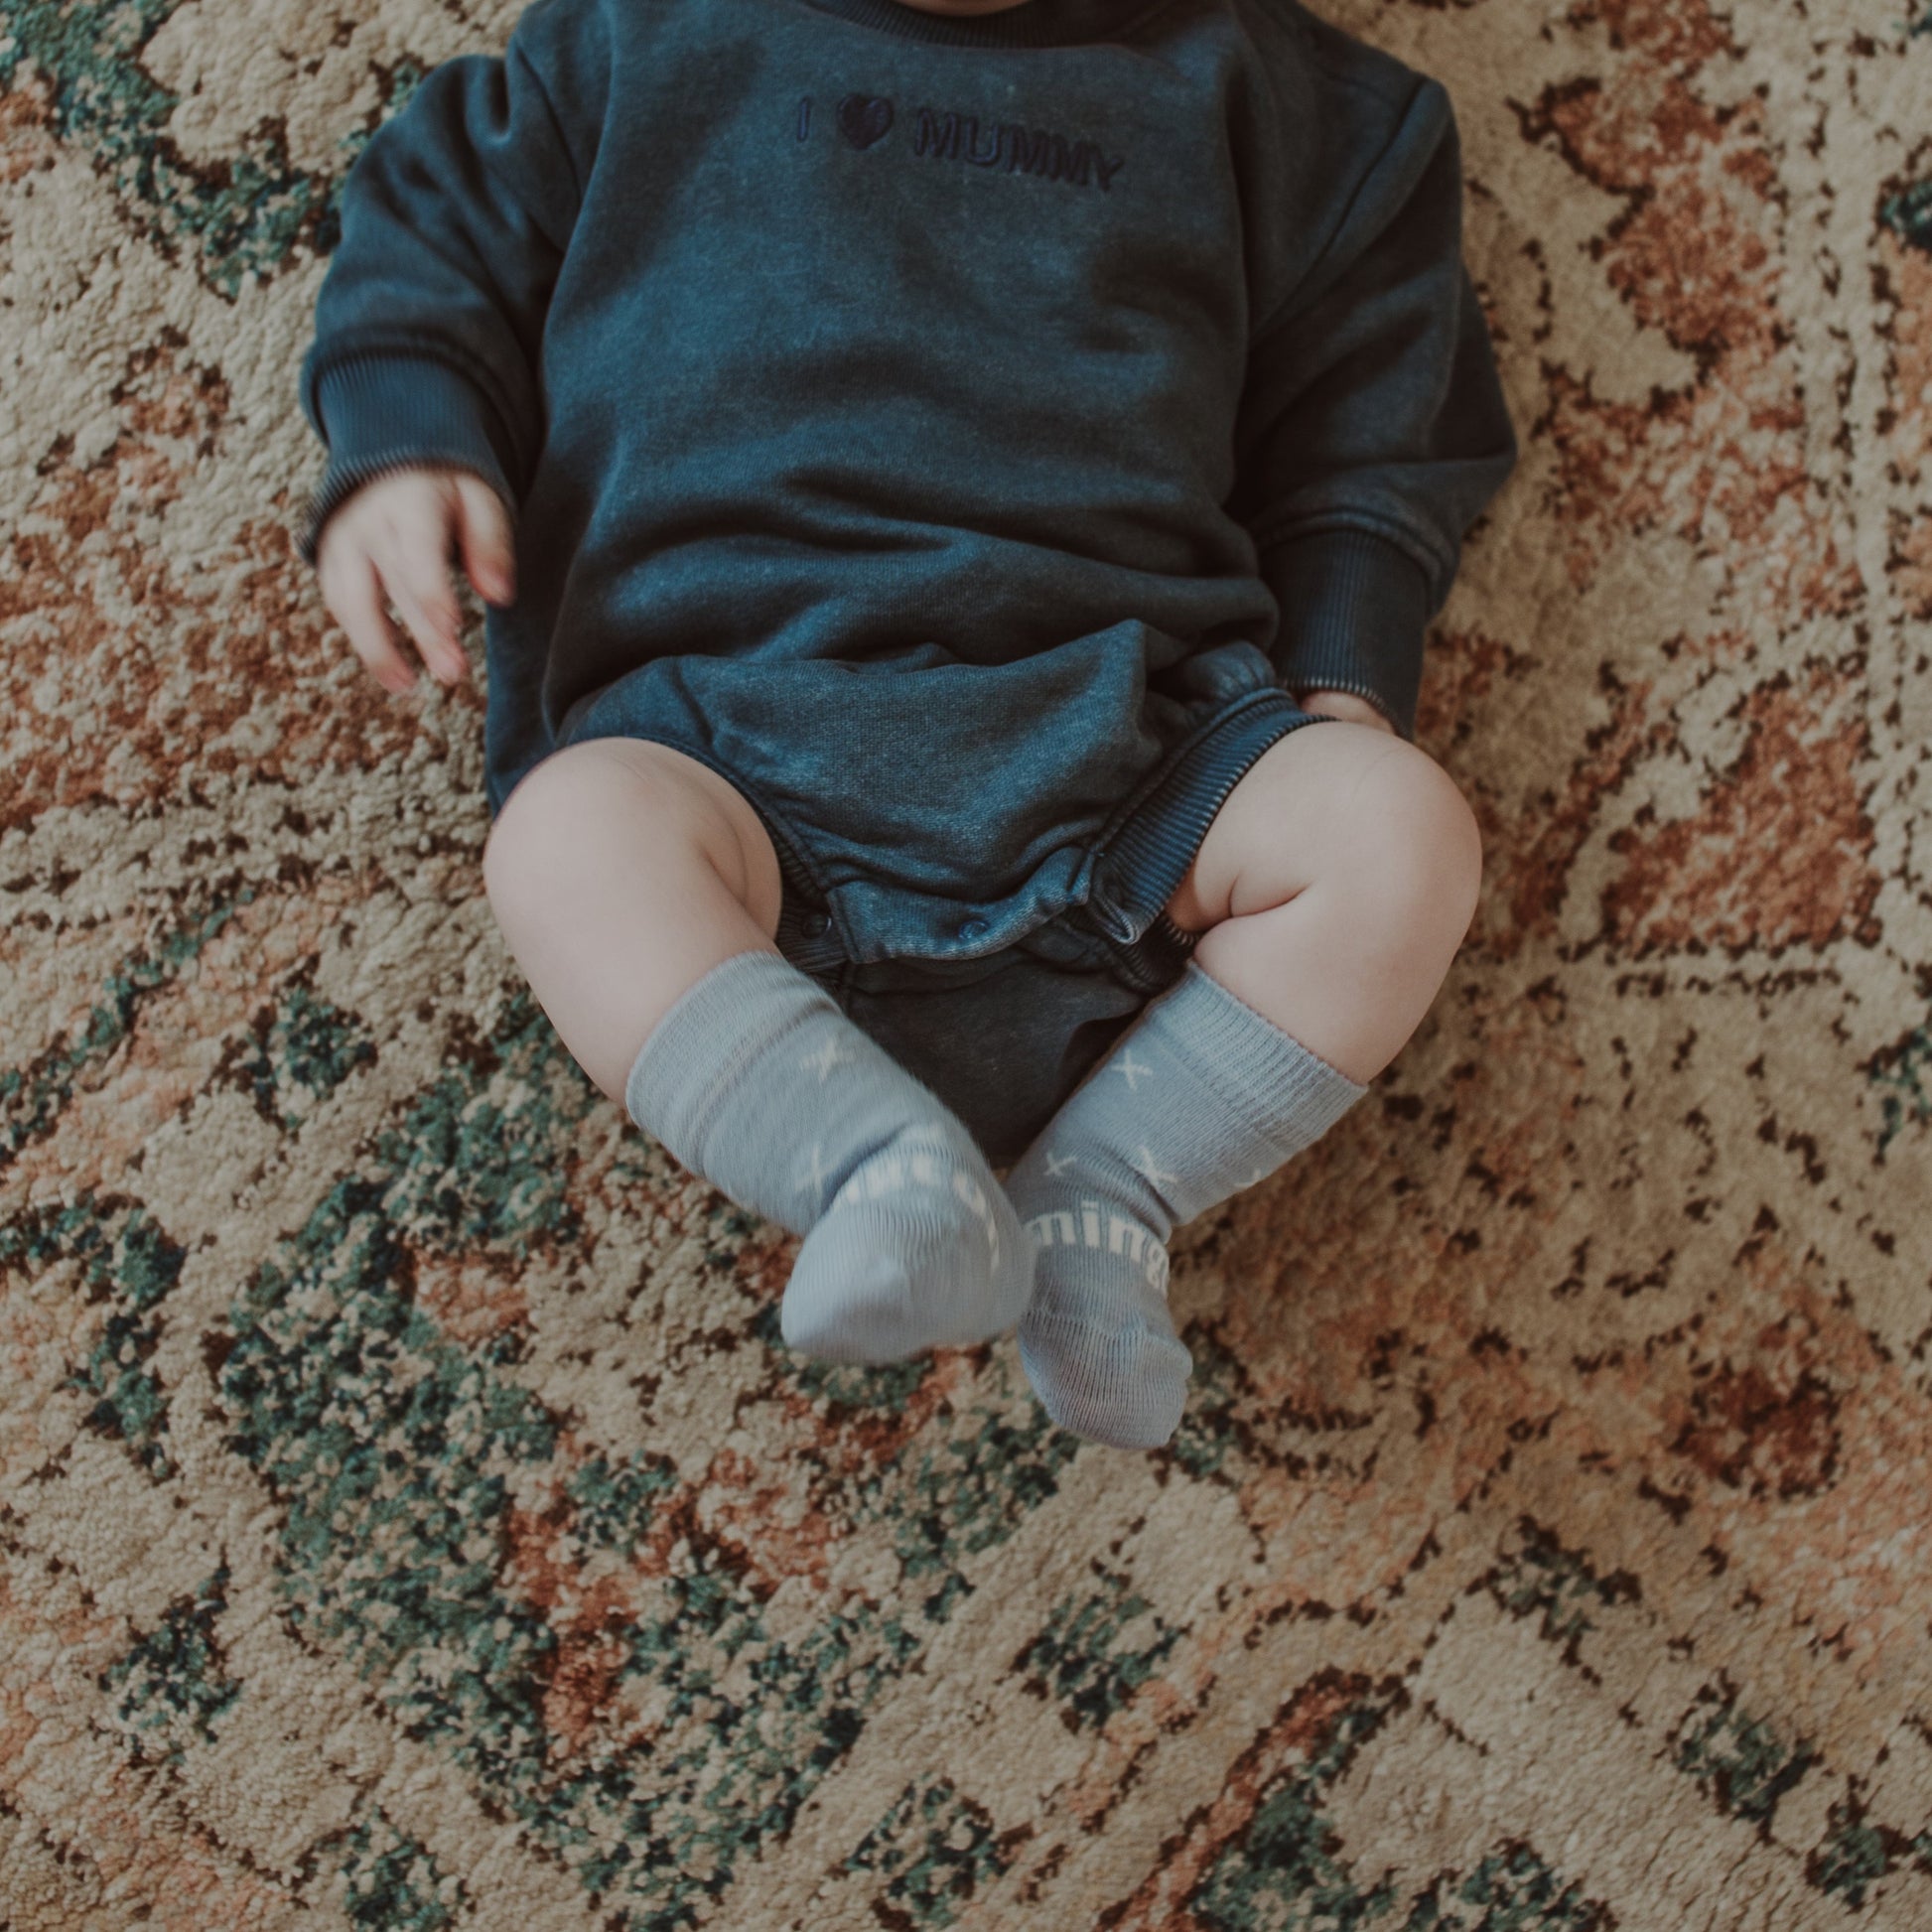 Baby lying on a mat wearing crew socks in pale blue knit merino wool with a white X pattern.